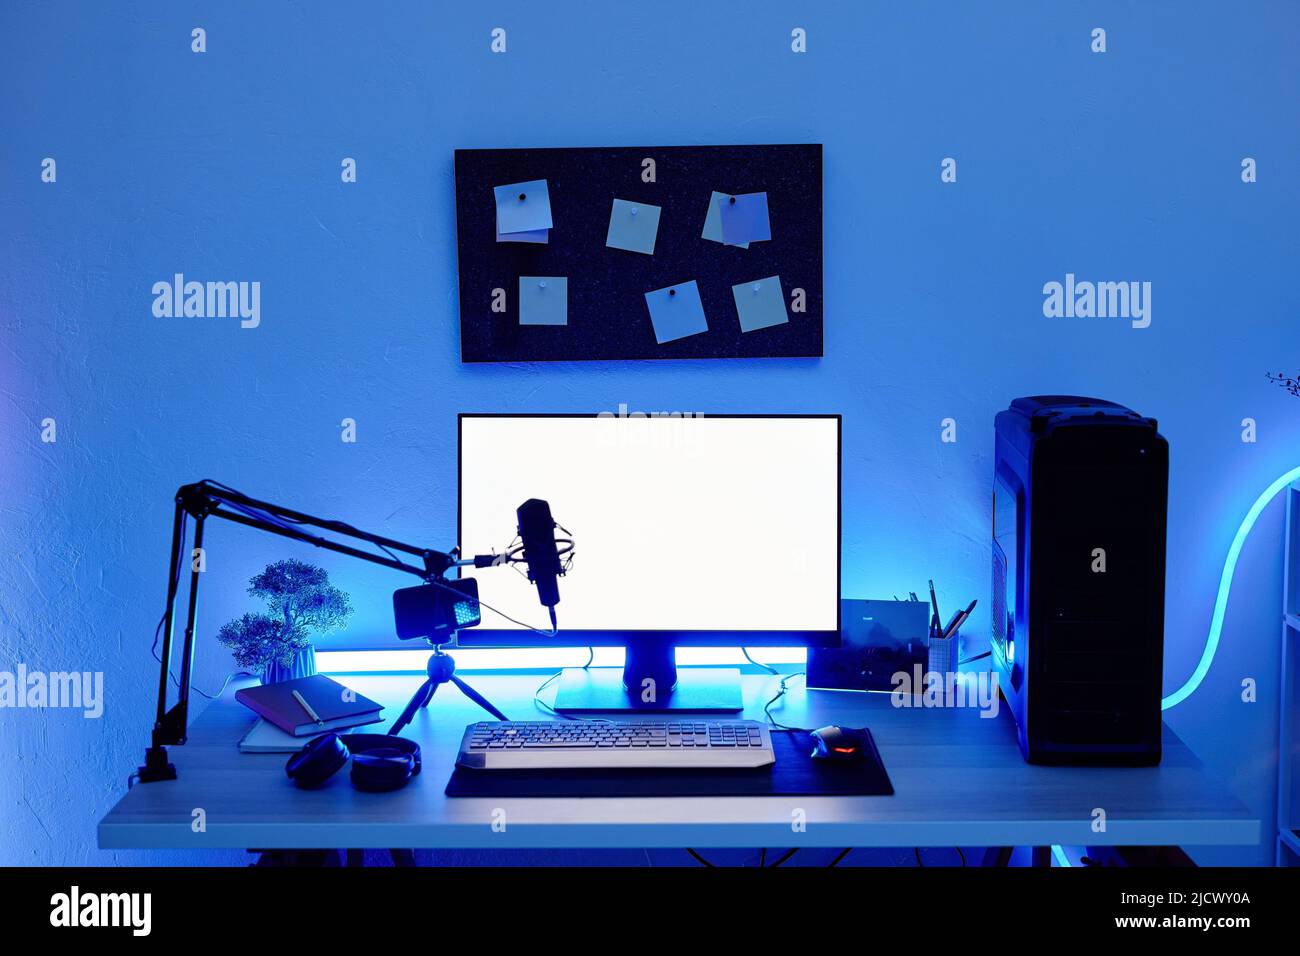 Background image of gaming setup PC on desk lit with blue neon lighting,  screen mockup Stock Photo - Alamy